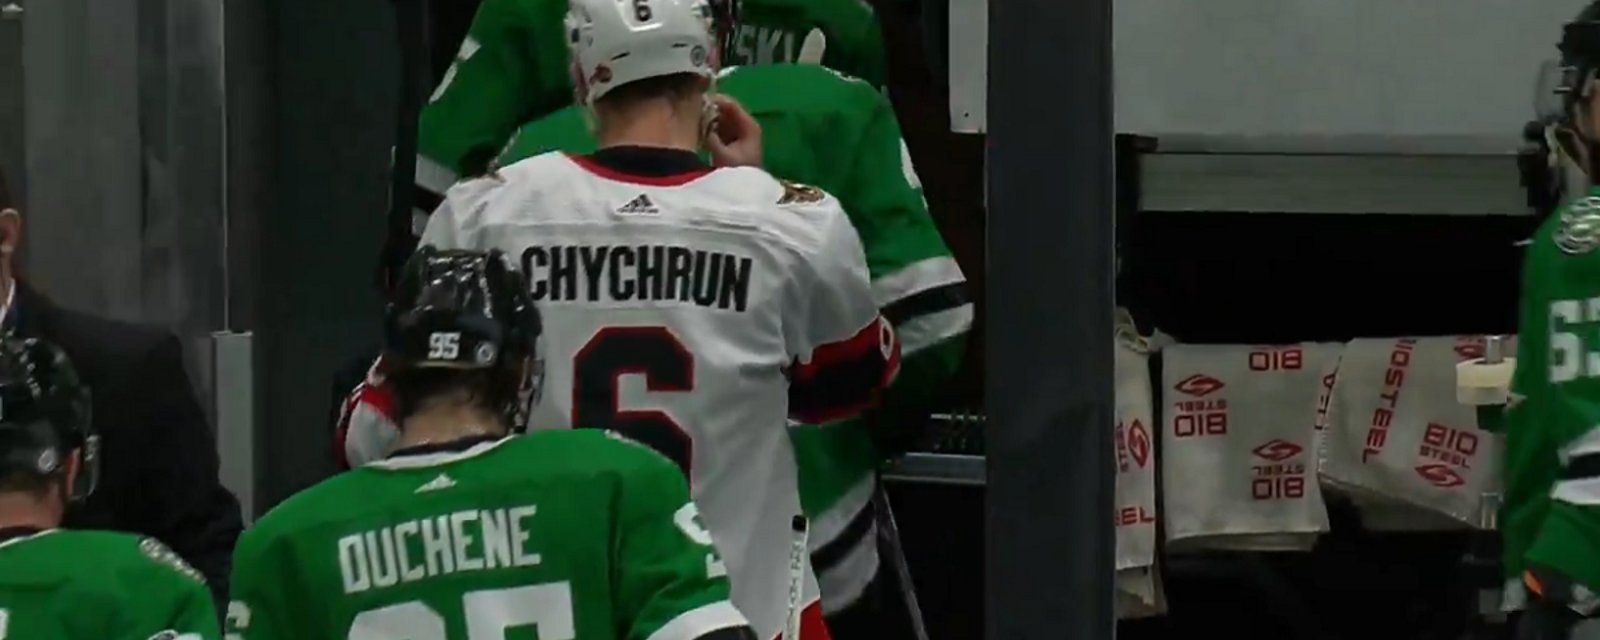 Jakob Chychrun tries to switch teams during intermission.